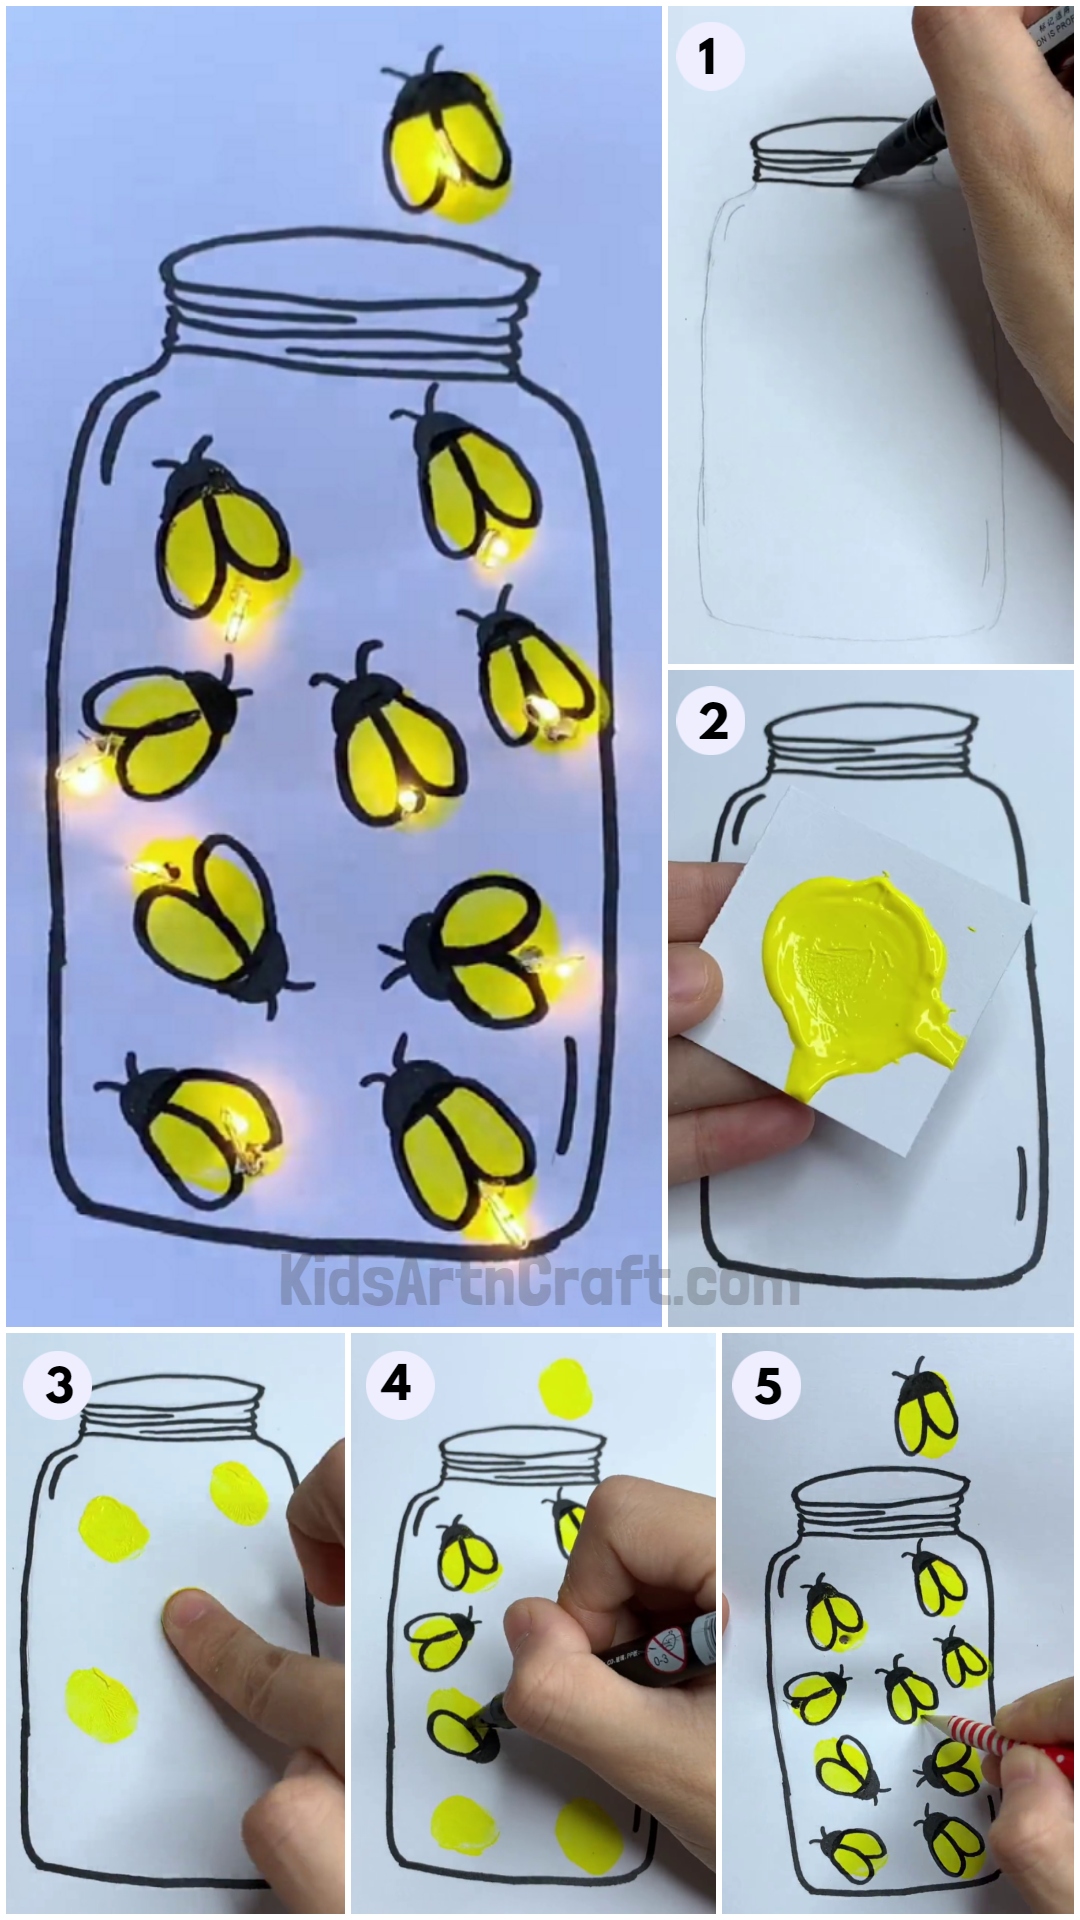 DIY Firefly With String Lights Craft Tutorial For Kids